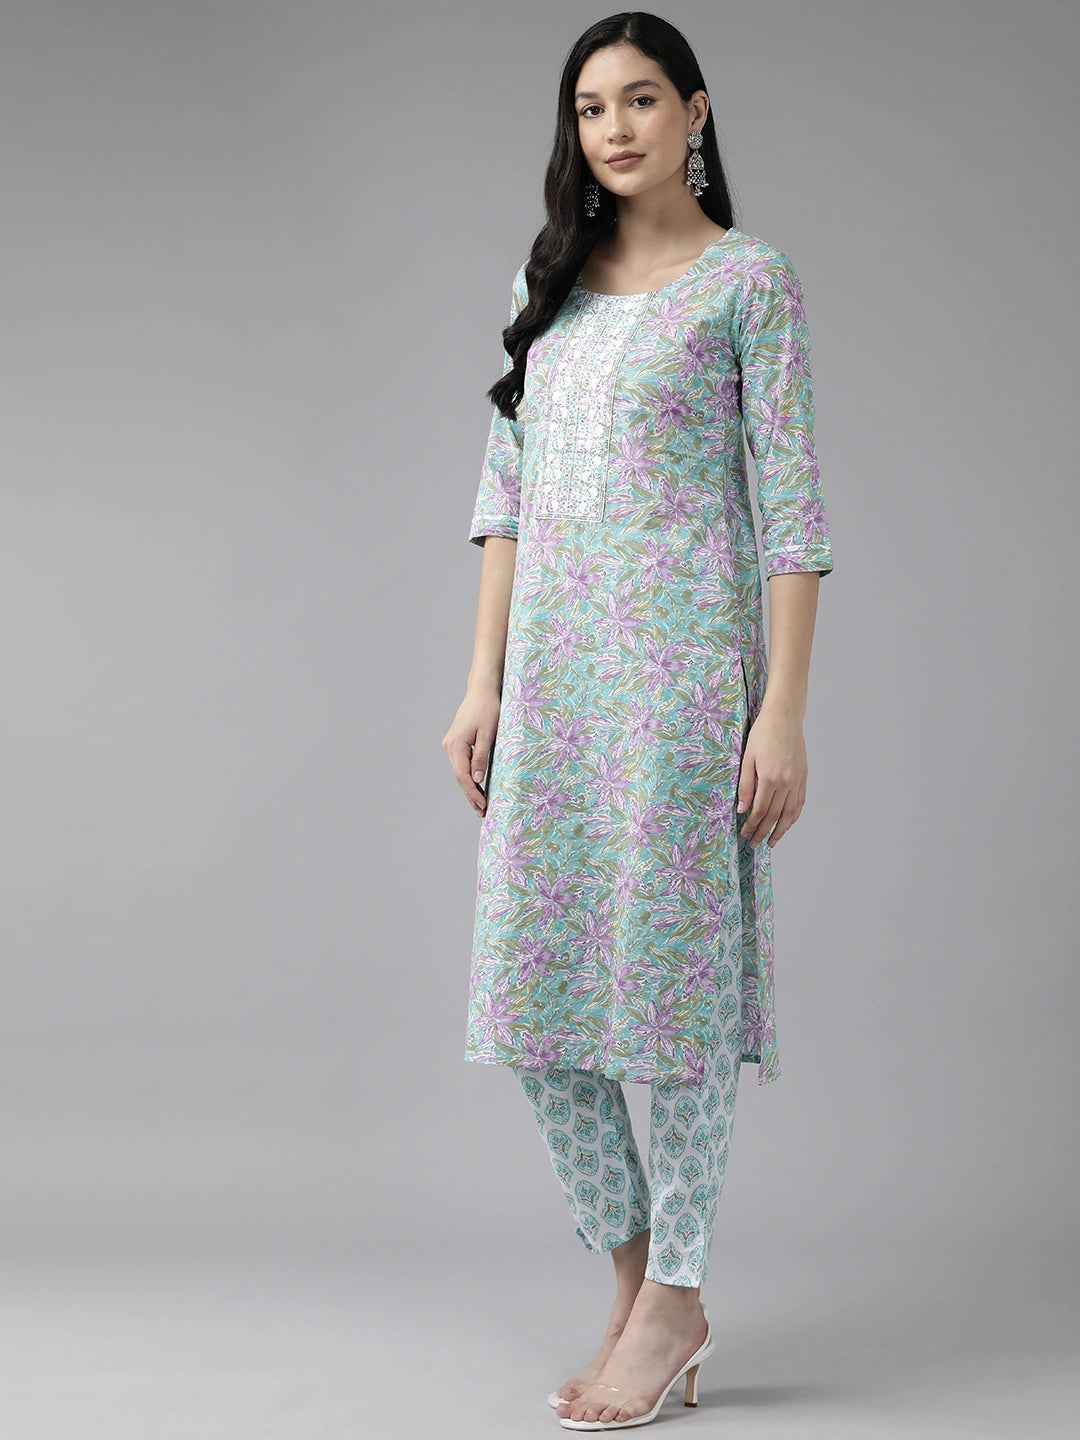 Sea green Floral Embroidered Pure Cotton Kurta with Trousers & With Dupatta Set-Yufta Store-1443SKDSGS